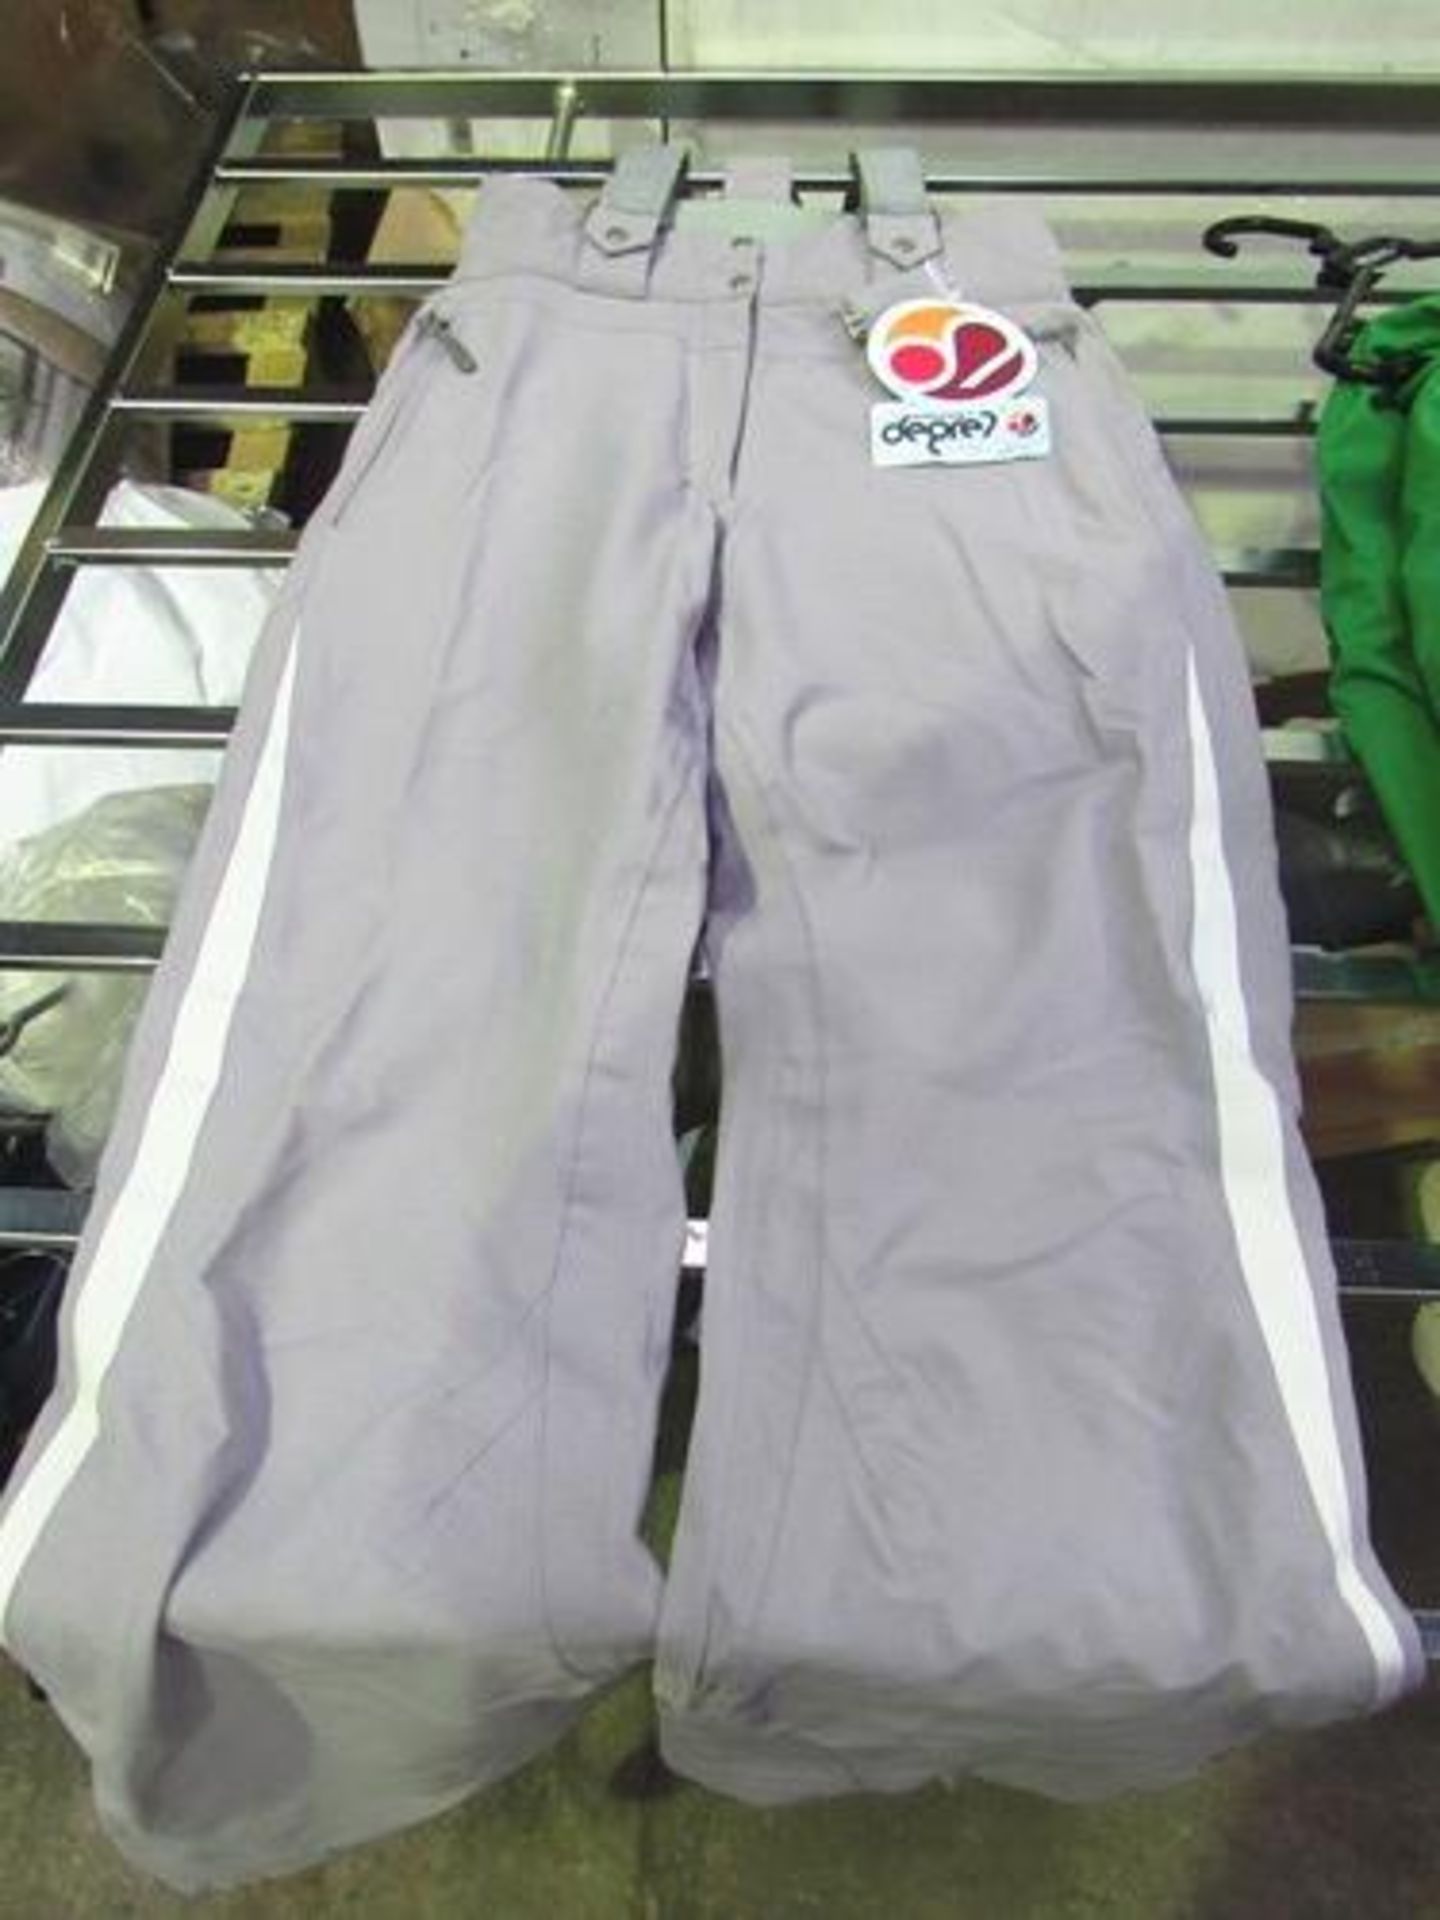 1 x Degre7 ladies ski pants, size small, braces slightly soiled in storage, and 1 x Eider Thea